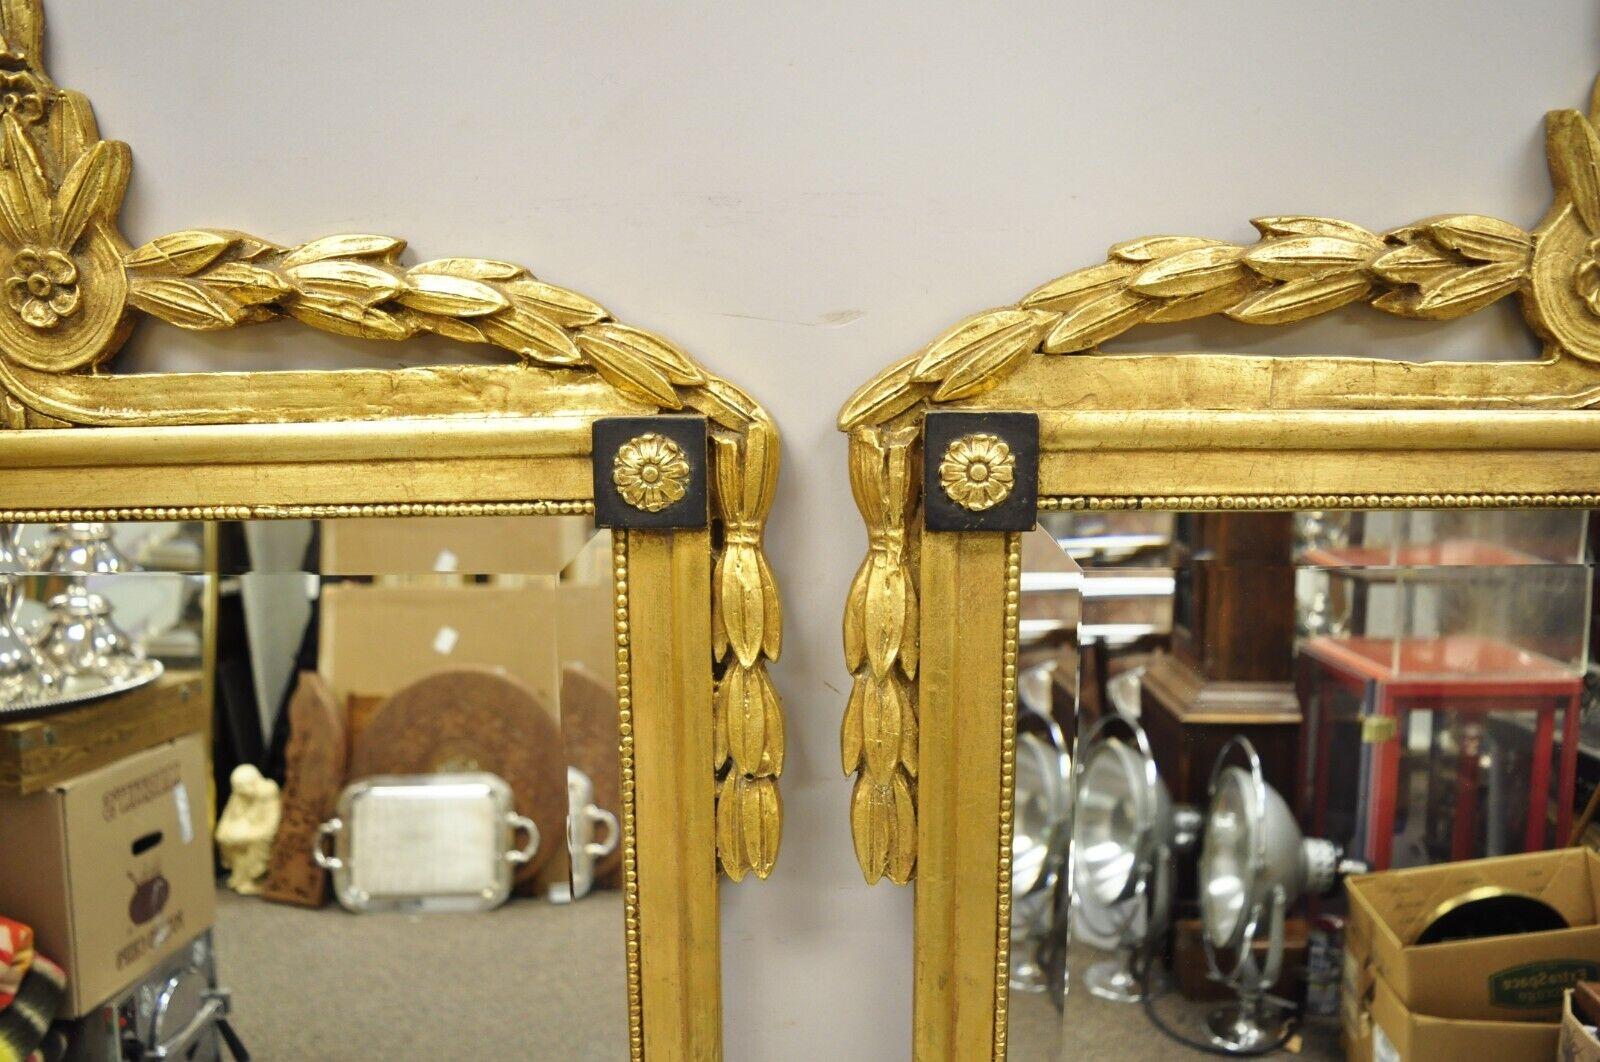 20th Century Friedman Brothers French Neoclassical Carved Wood Large Wall Mirrors - a Pair